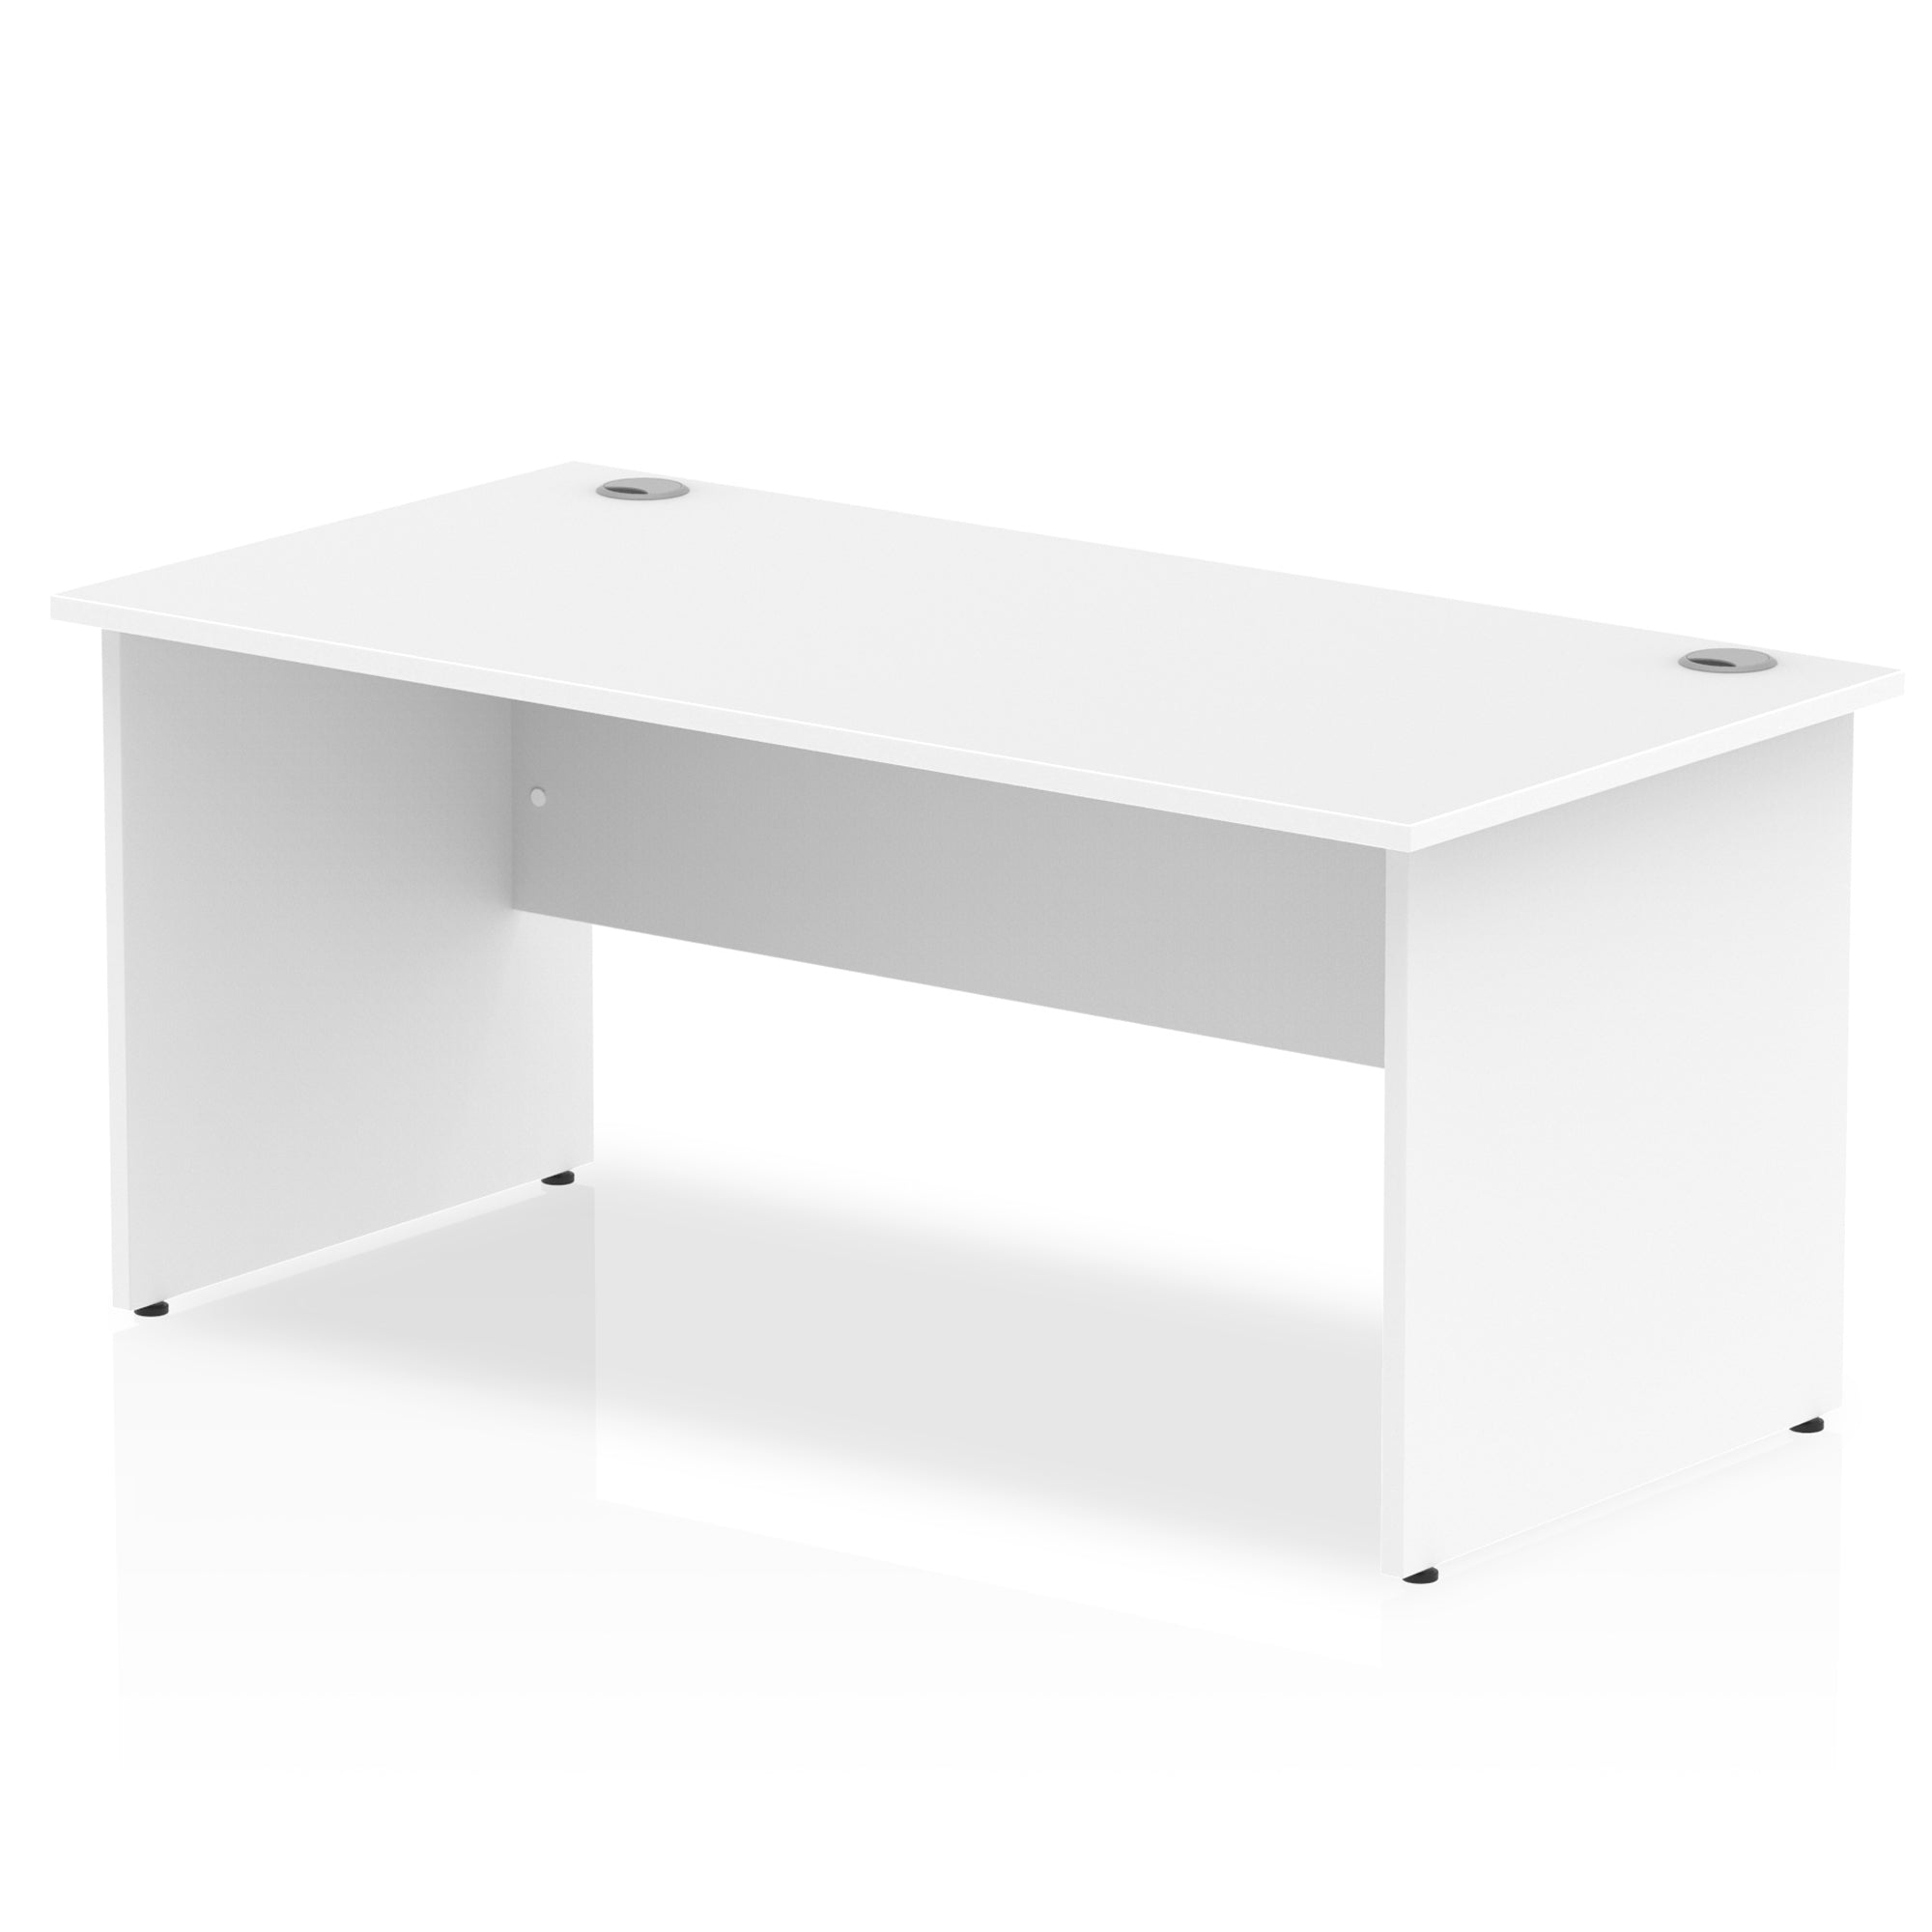 Impulse 1600mm Straight Desk Panel End Leg - MFC Rectangular Table, Self-Assembly, 5-Year Guarantee, 1600x800 Top, White/Matching Frame